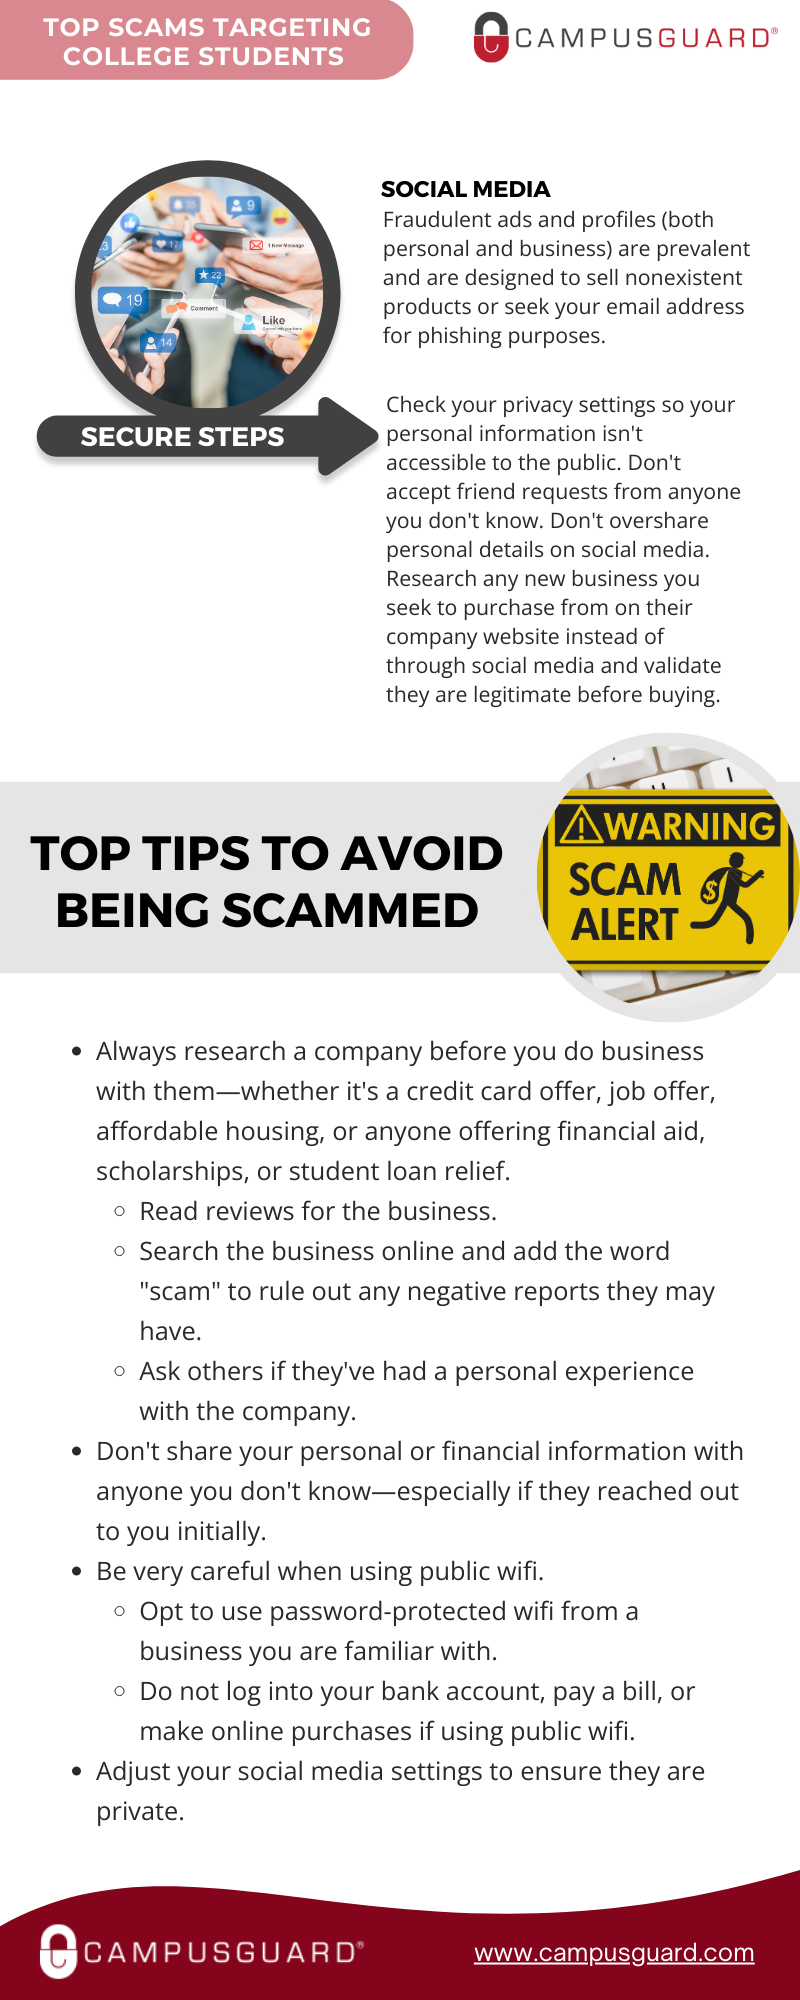 Top scams targeting college students - page 3